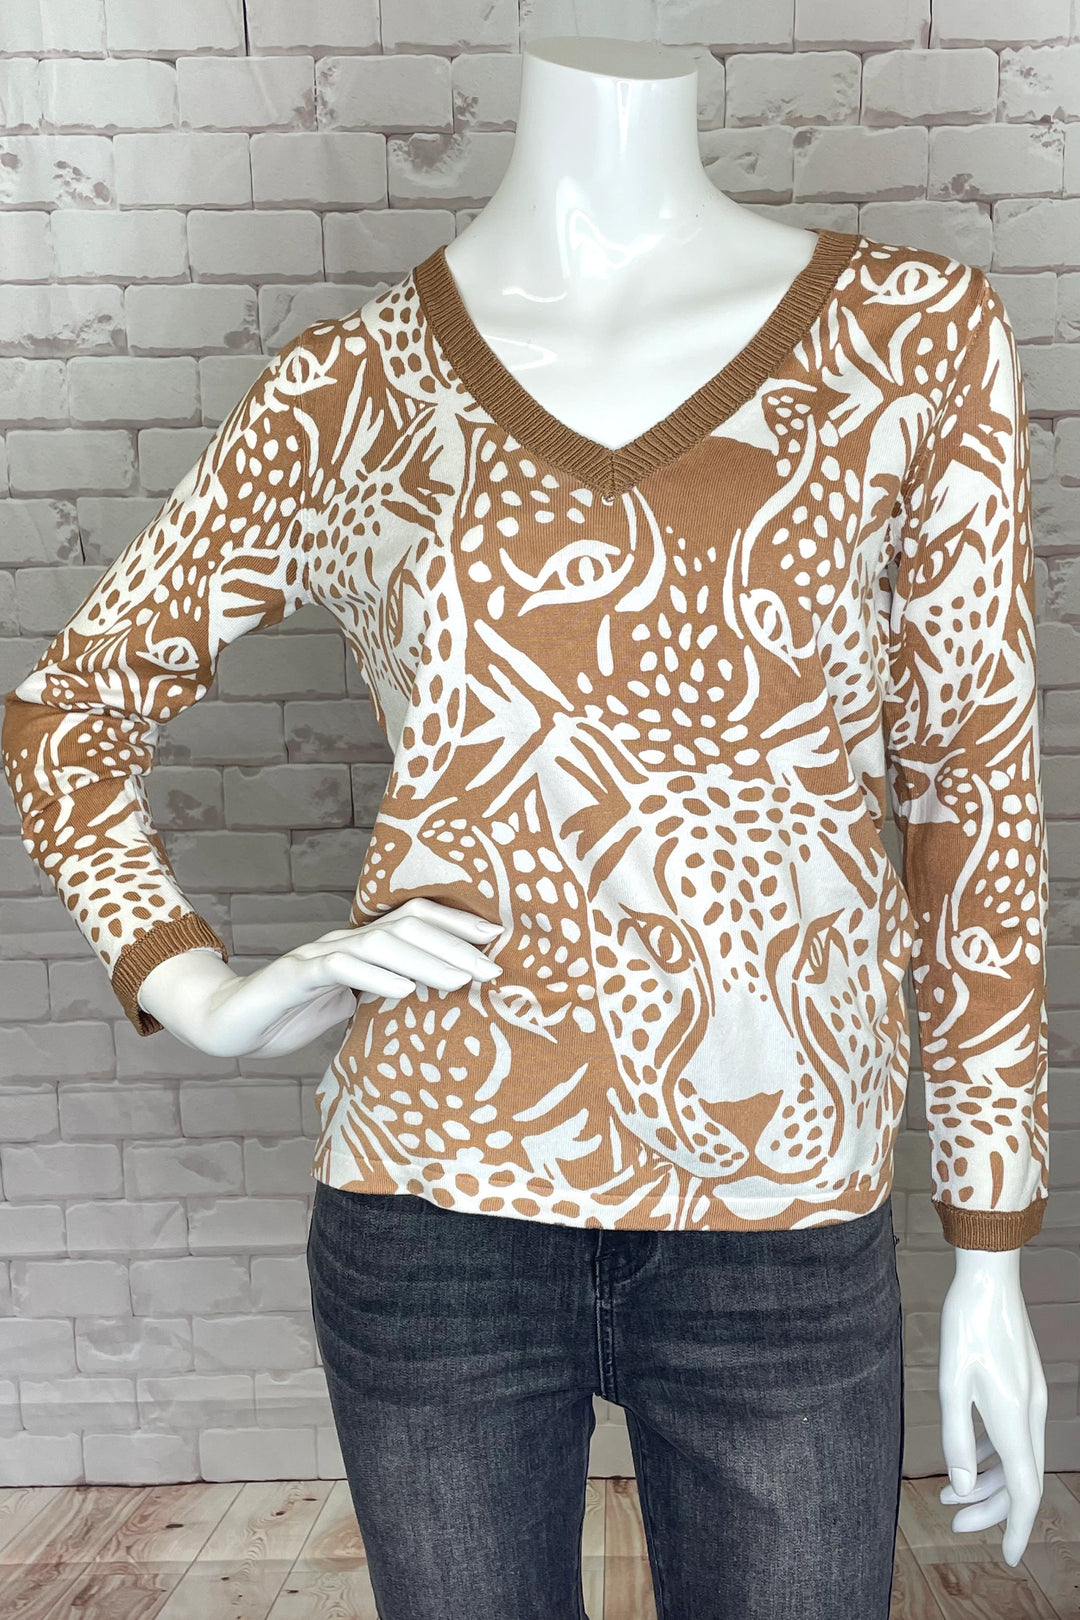 Vibrantly printed with the cheetah and an African motif overall, this camel-coloured sweater is sure to turn heads!